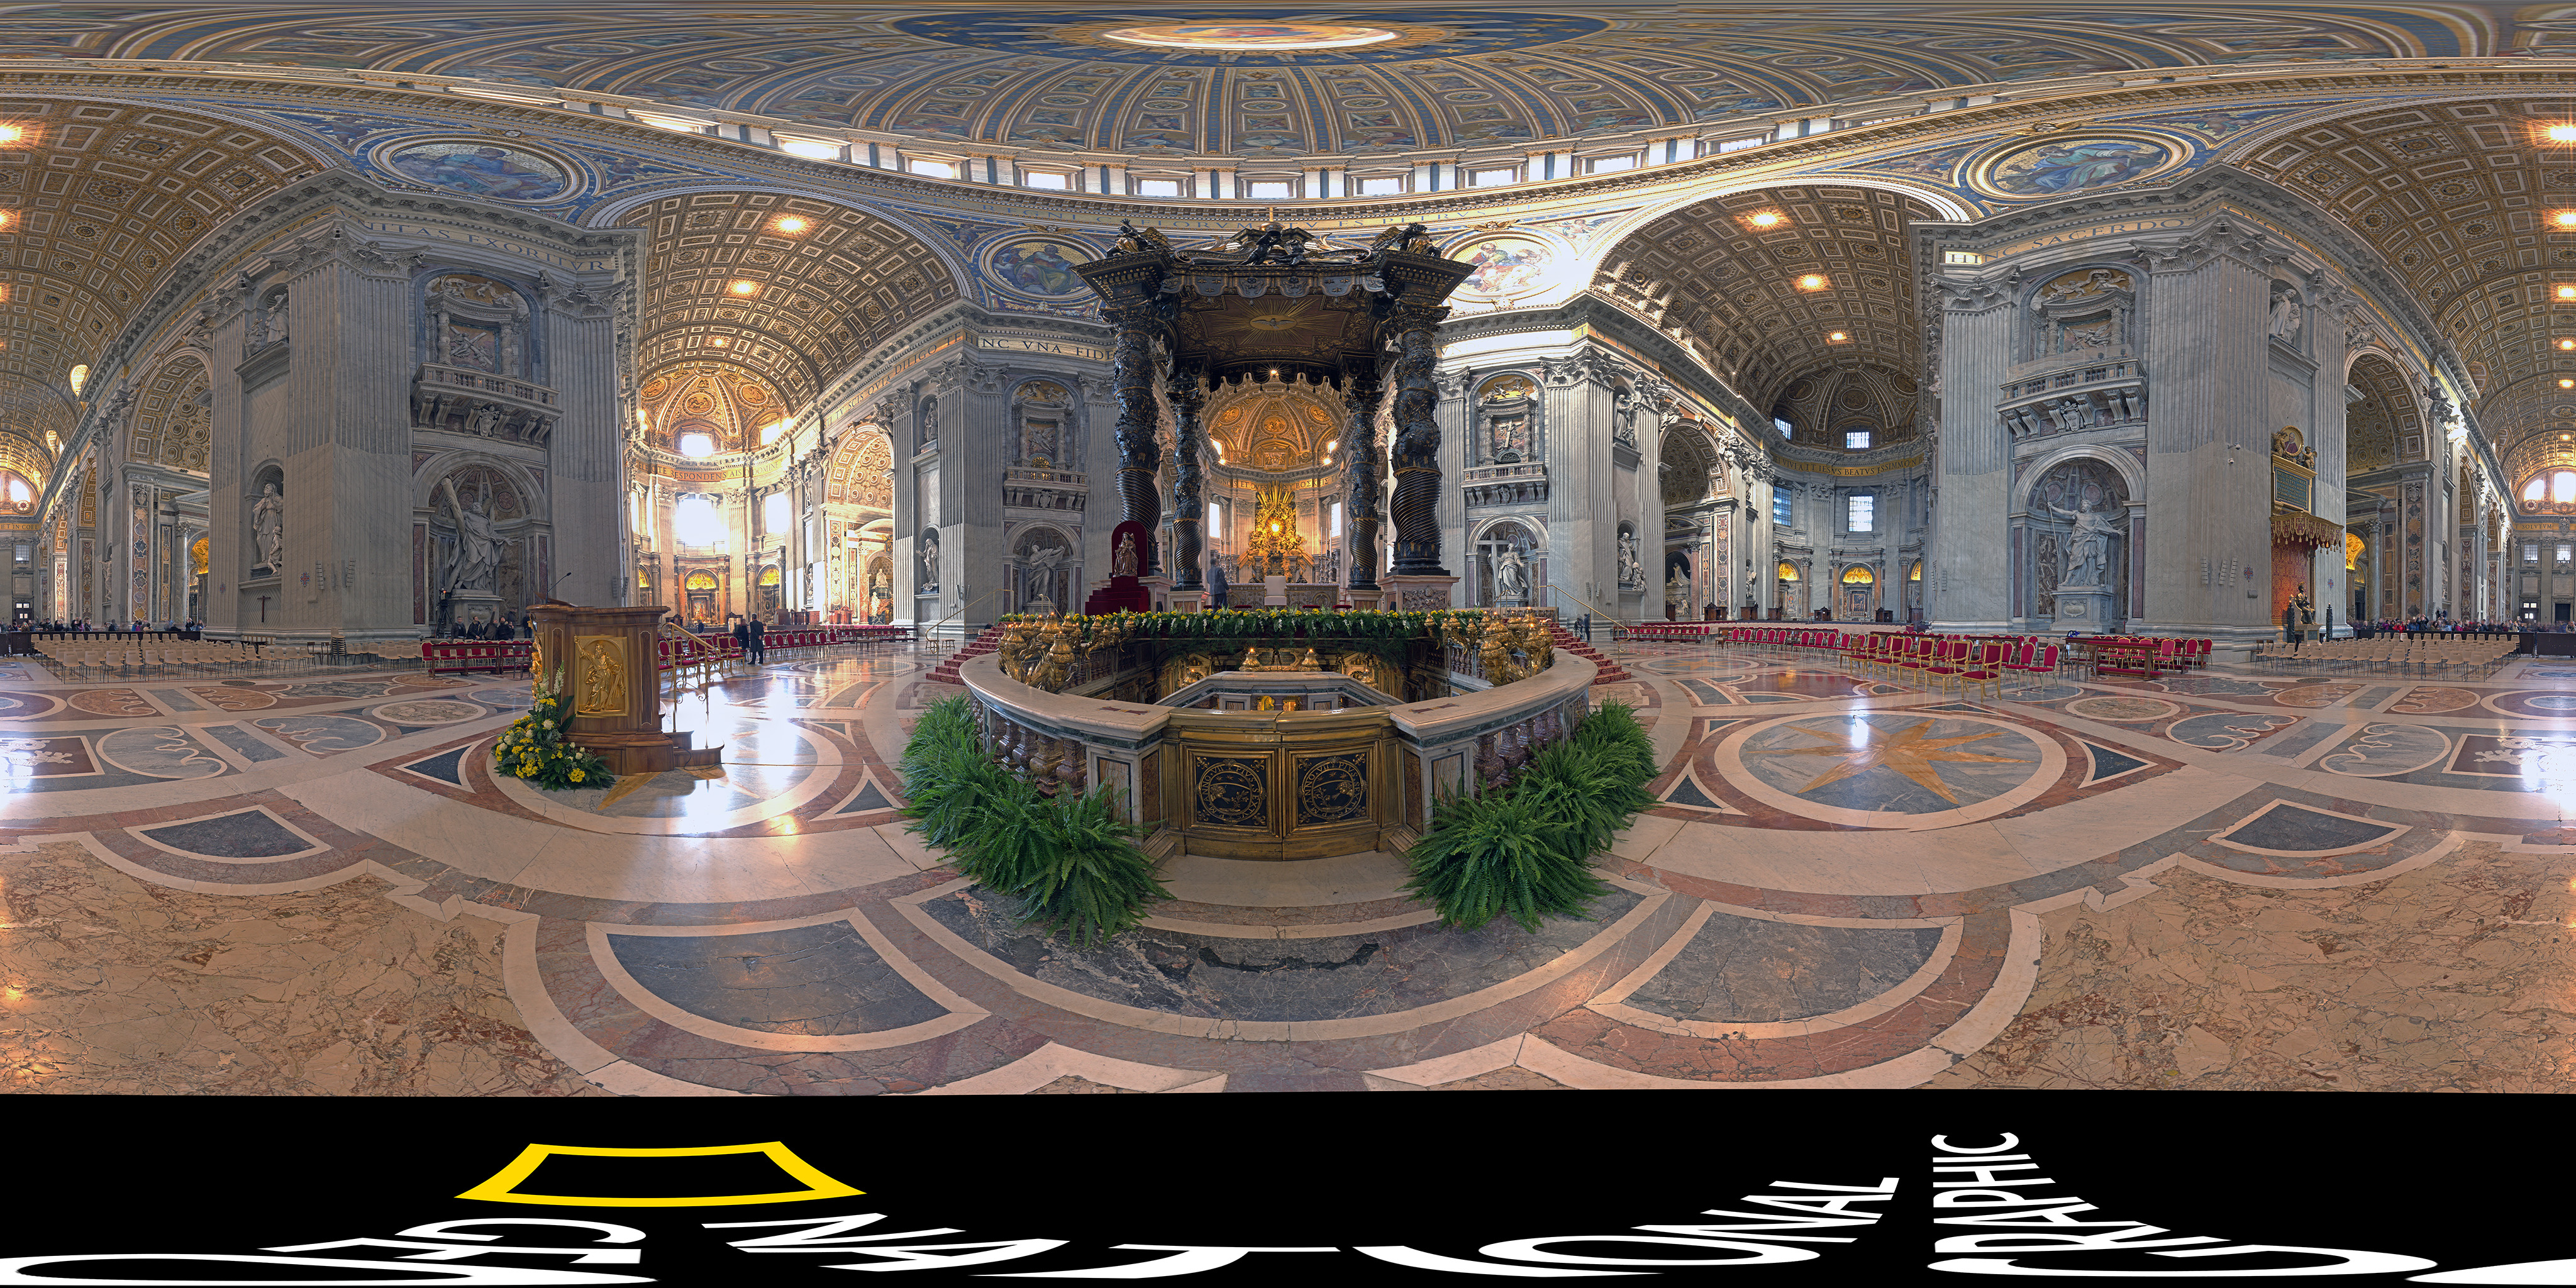 Take Amazing 360° Tour of St. Peter's in Vatican City From Your Chair